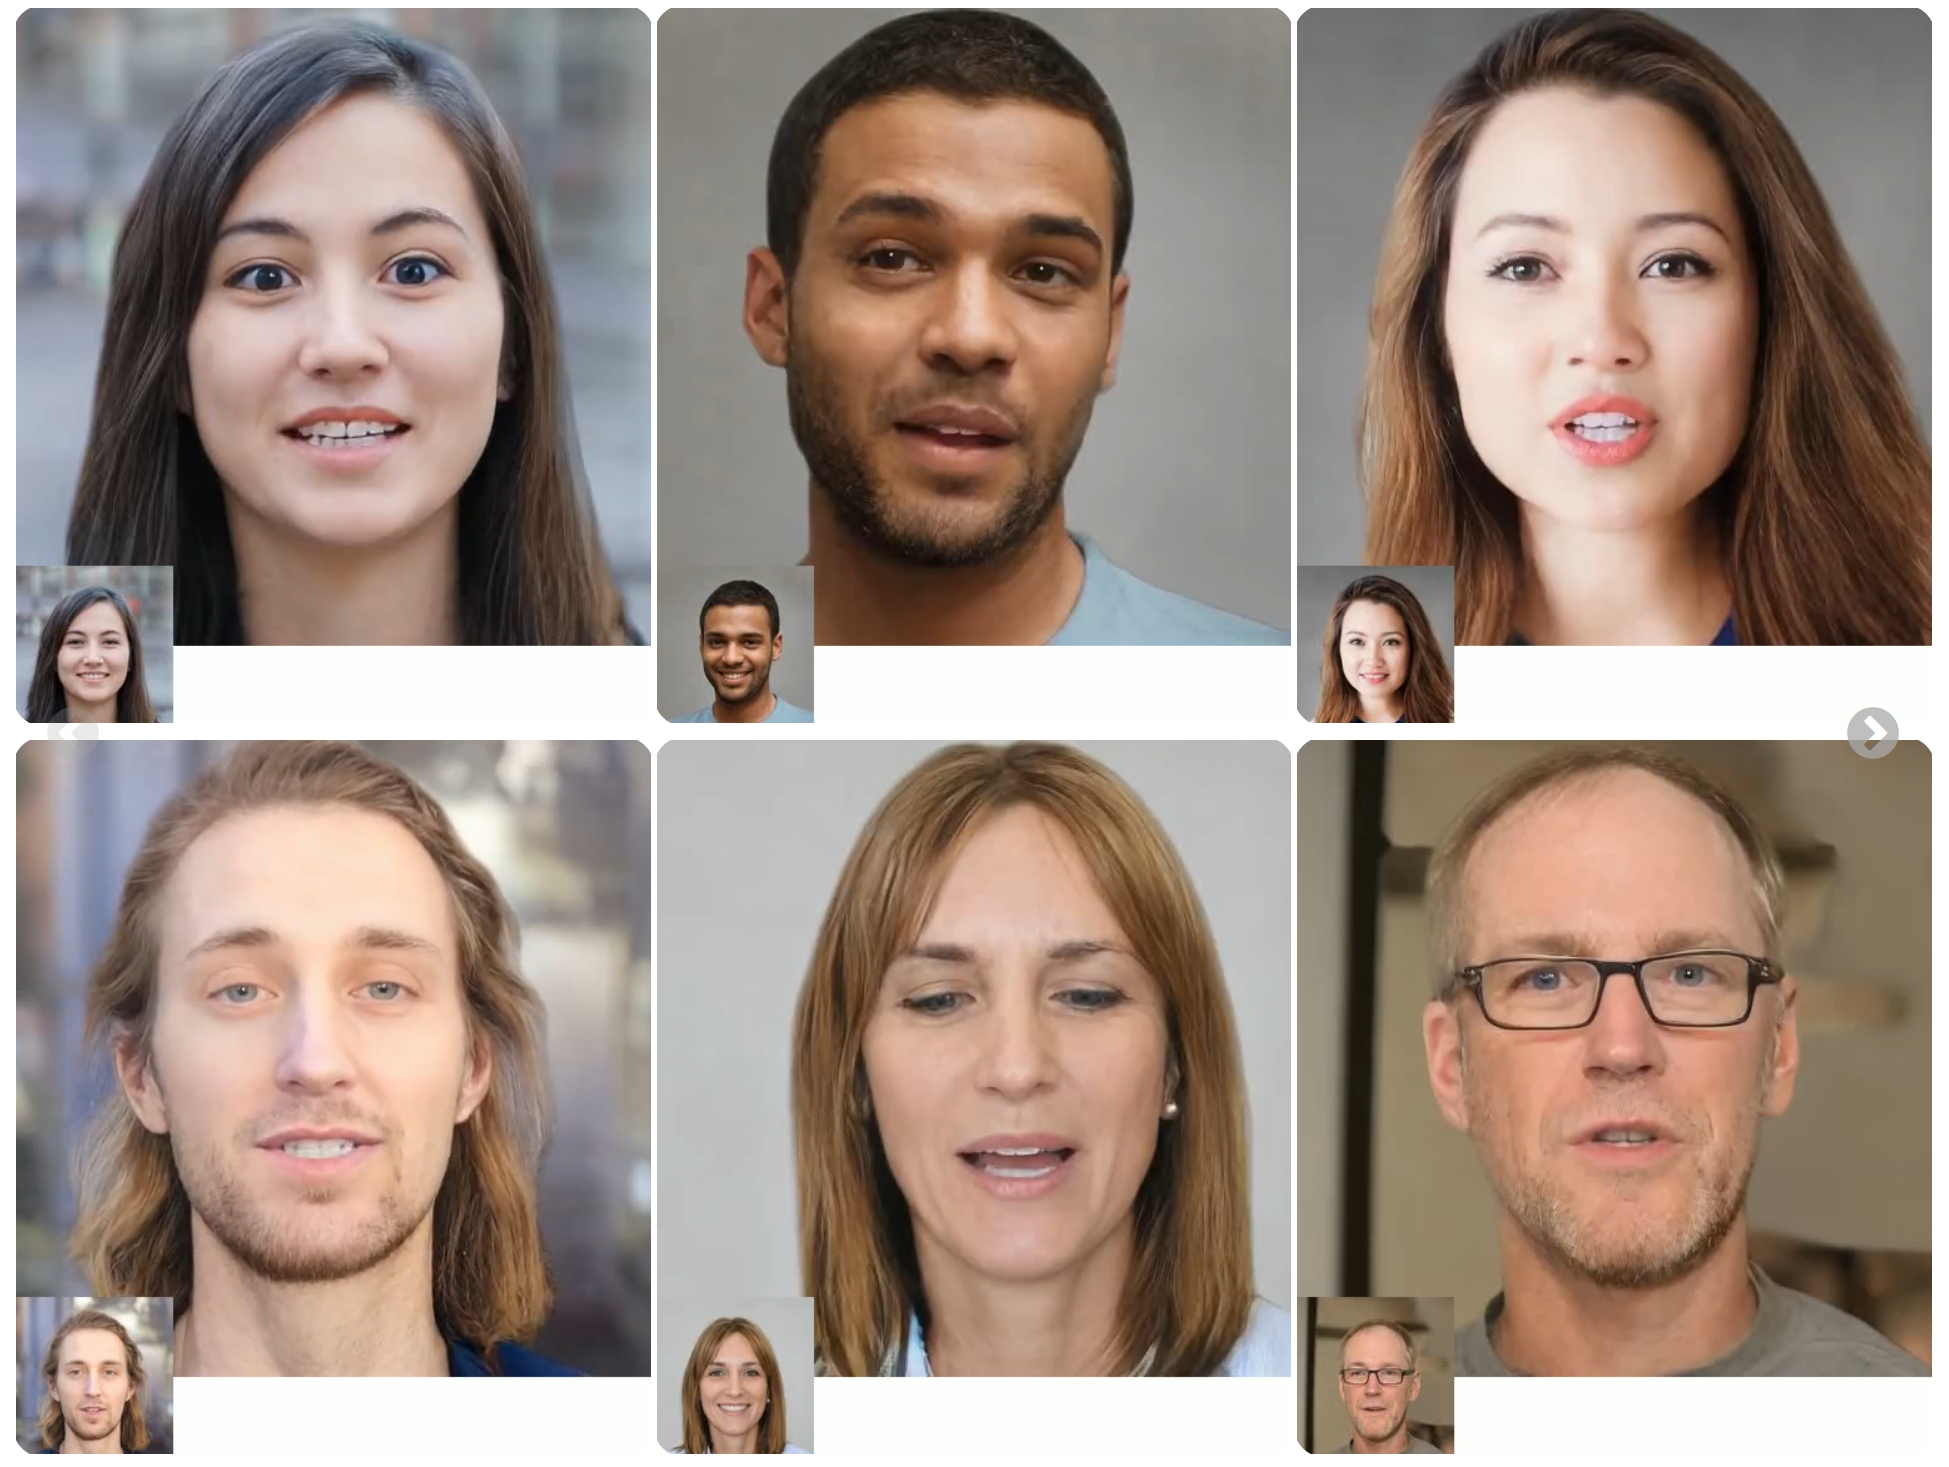 Microsoft's new AI tool is a nightmare for deep fakes

